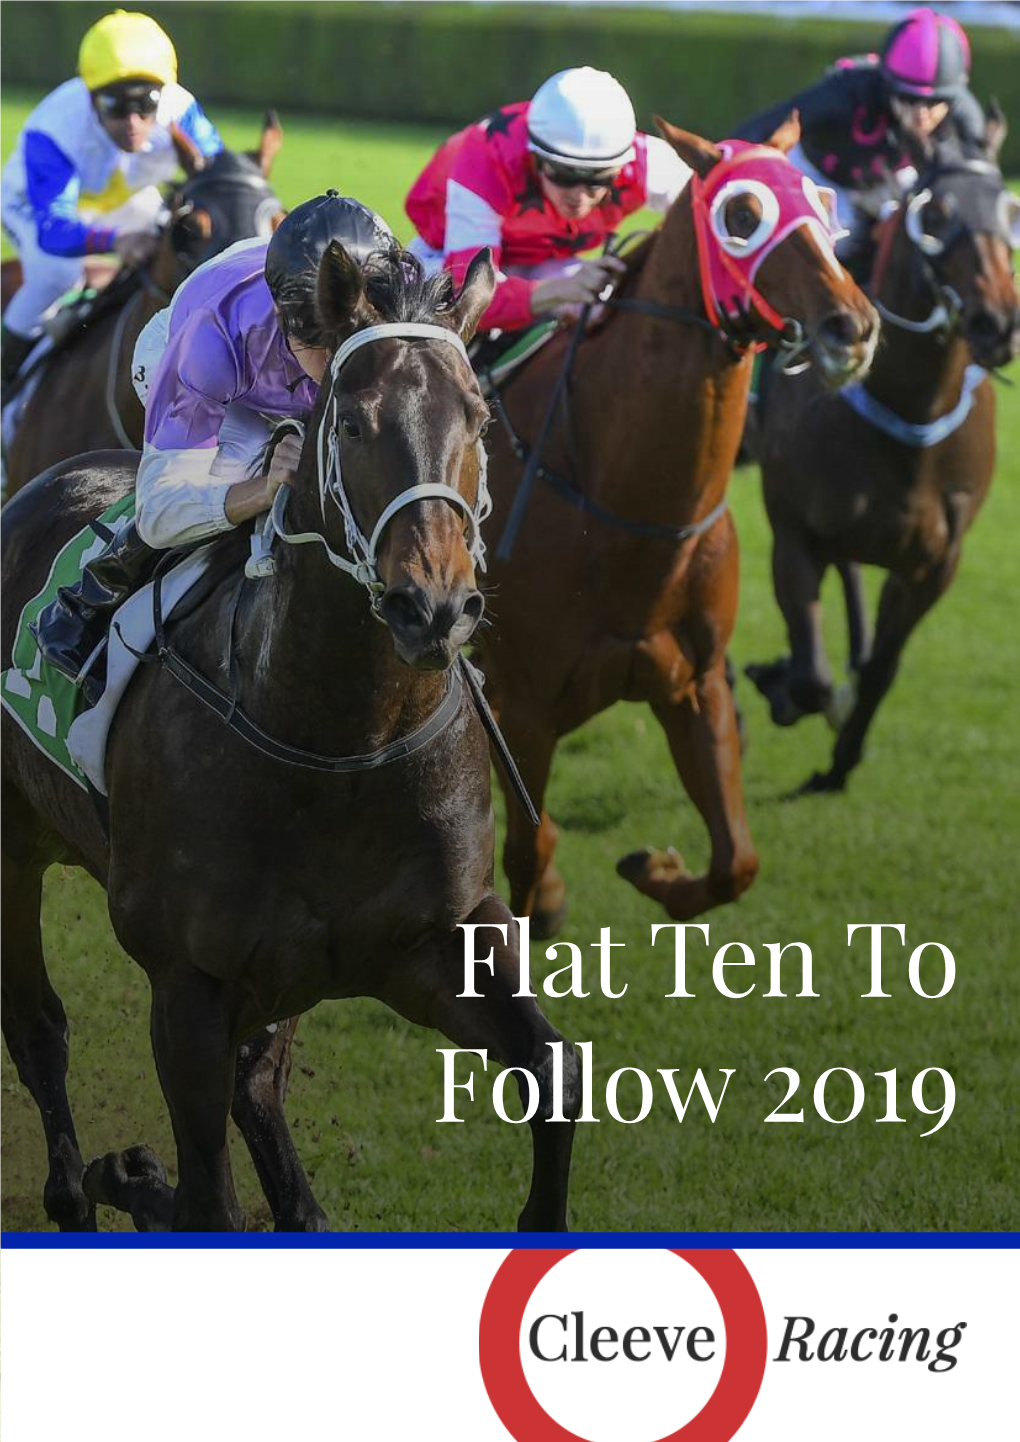 Flat Ten to Follow 2019 Who Are Cleeve Racing?